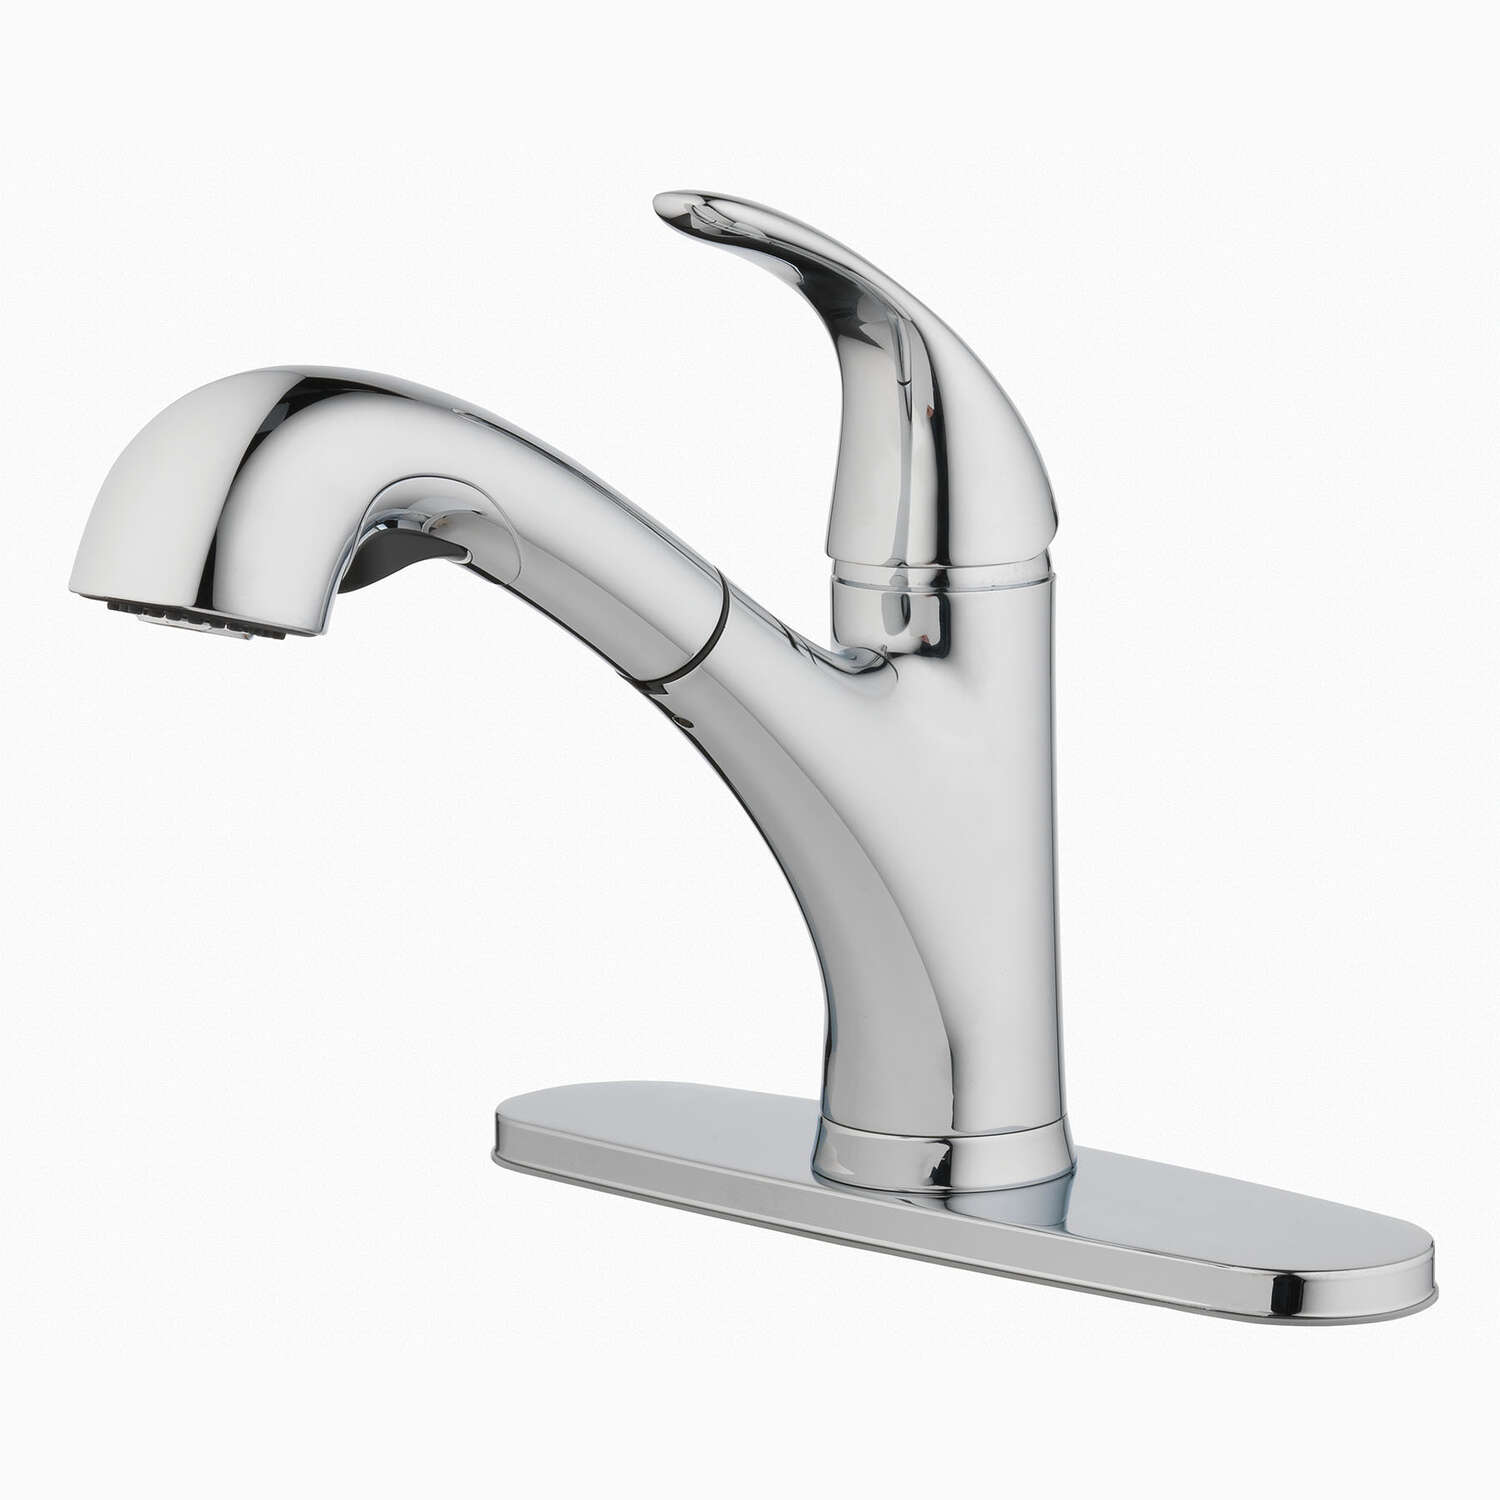 OakBrook Pacifica PullOut One Handle Chrome Kitchen